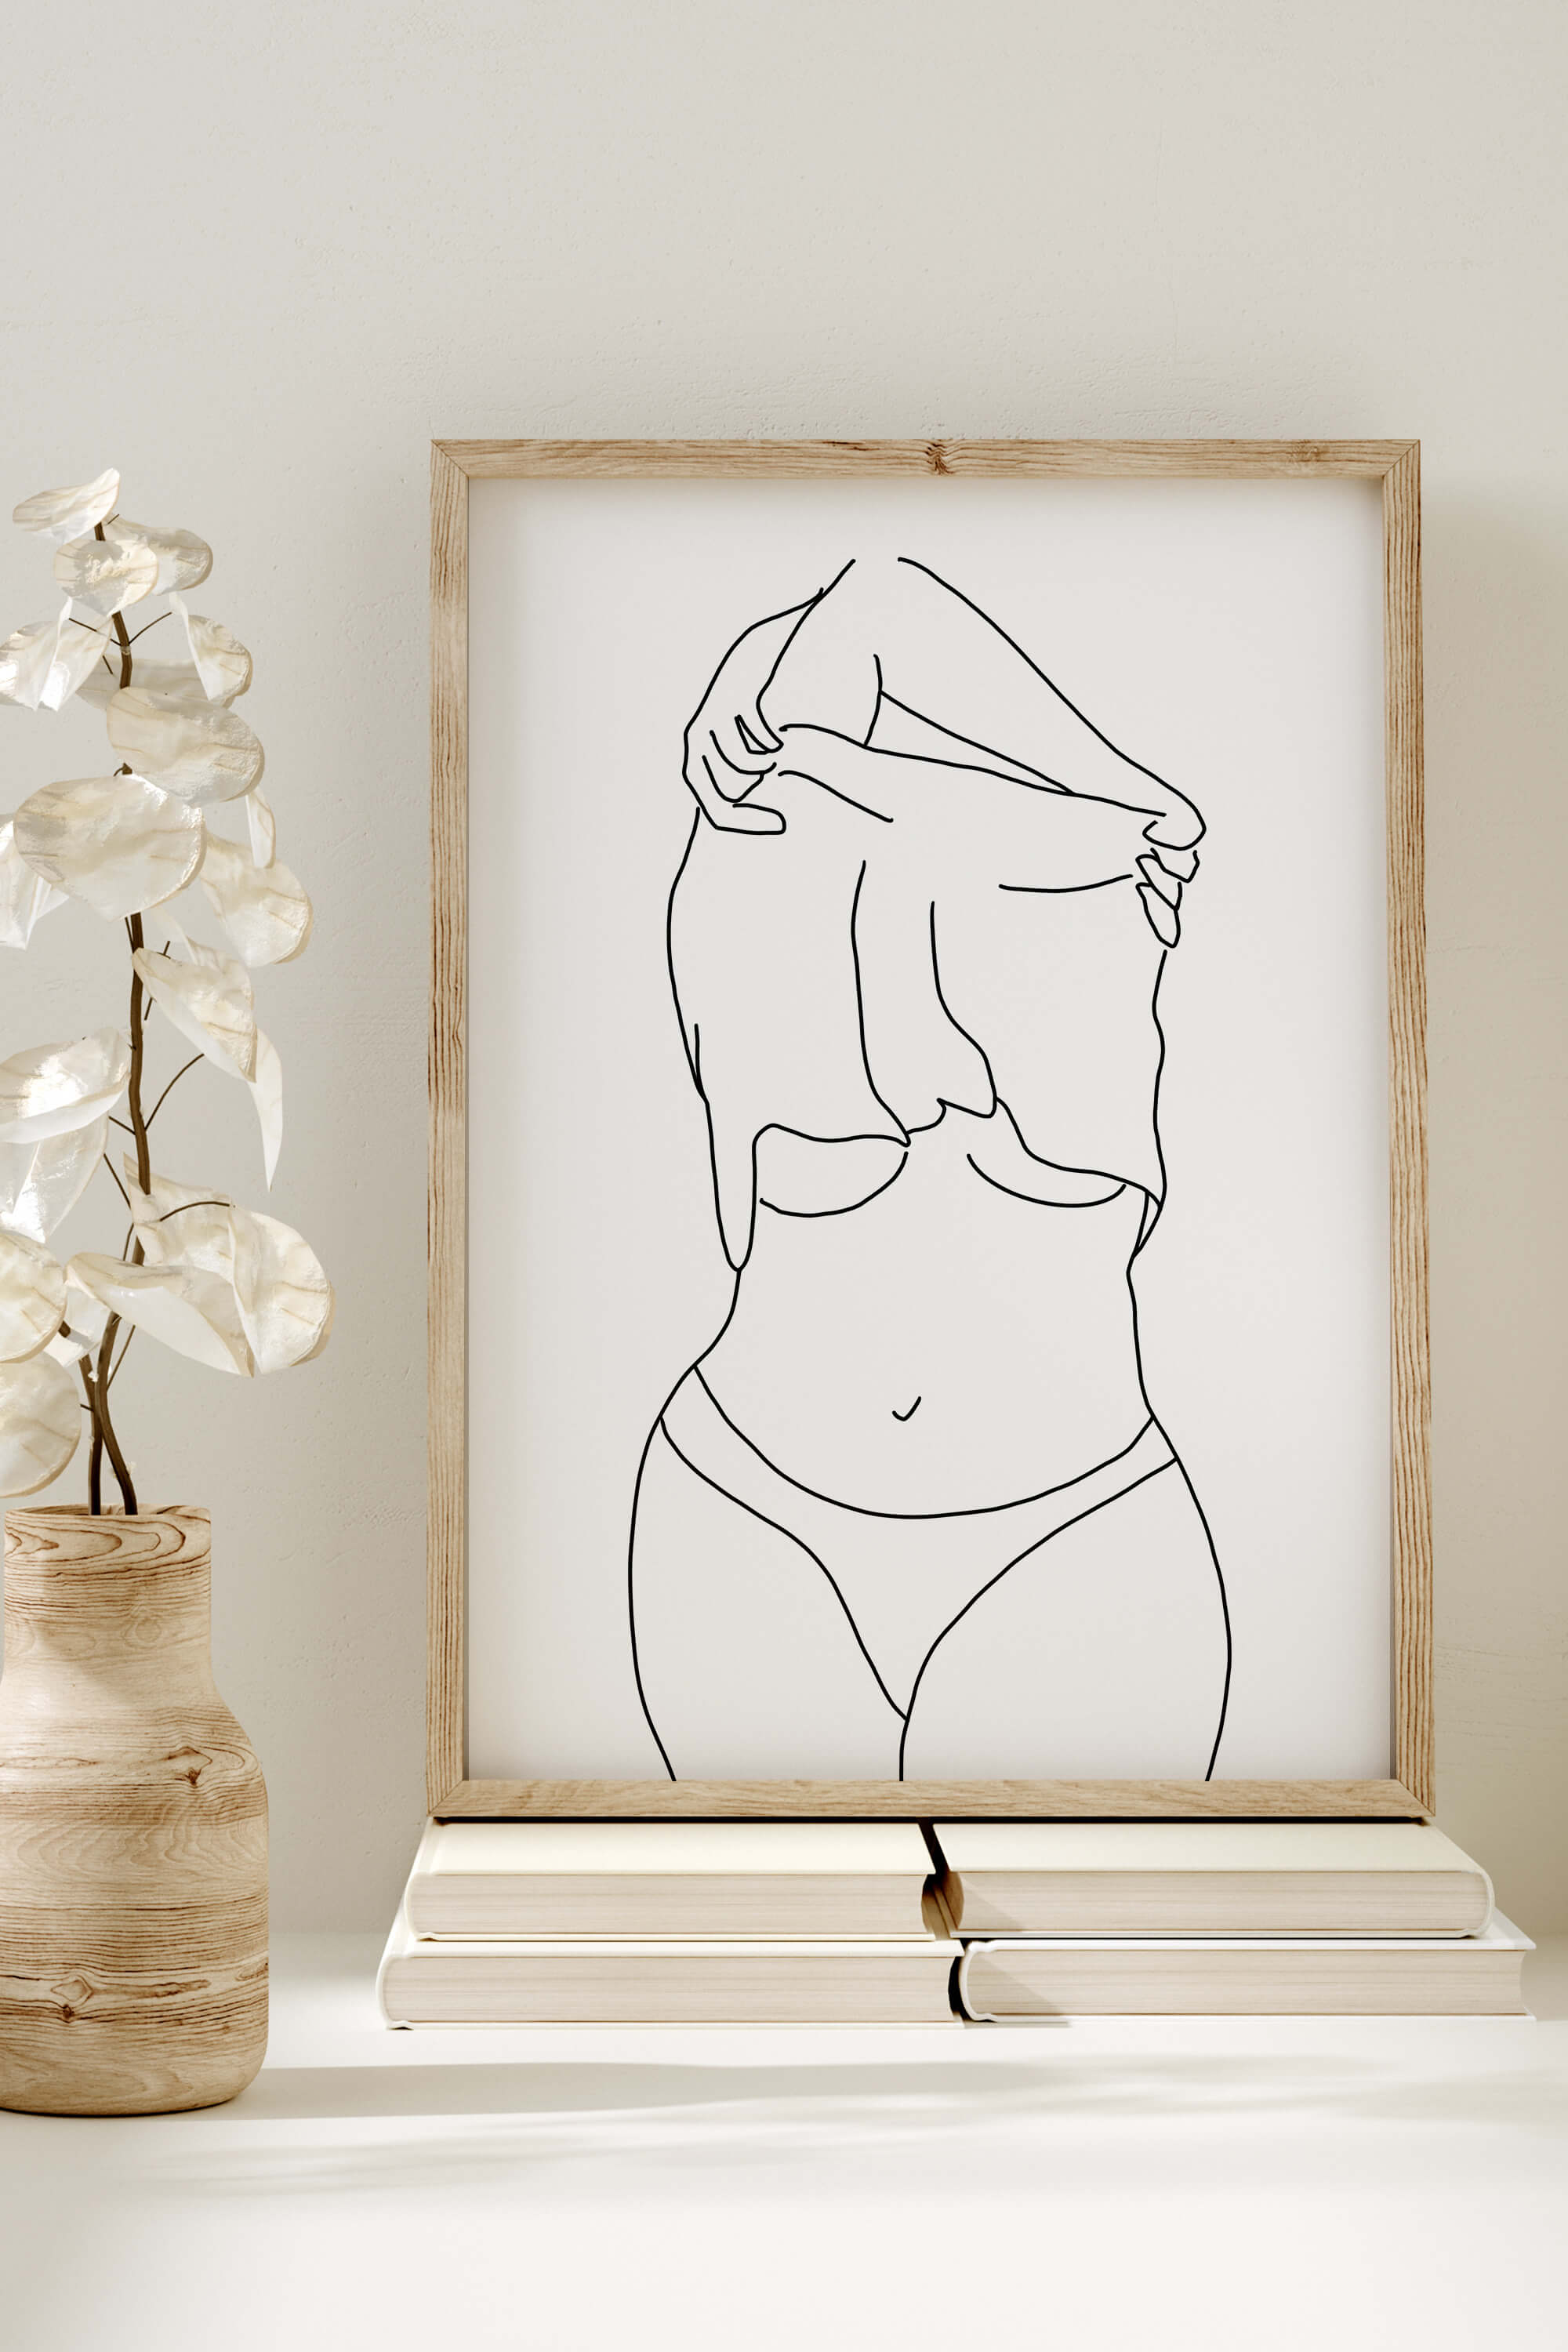 Timelessly elegant monochrome art featuring a curvy woman, celebrating body positivity. Meticulously crafted lines invite you to embrace the beauty in every curve.